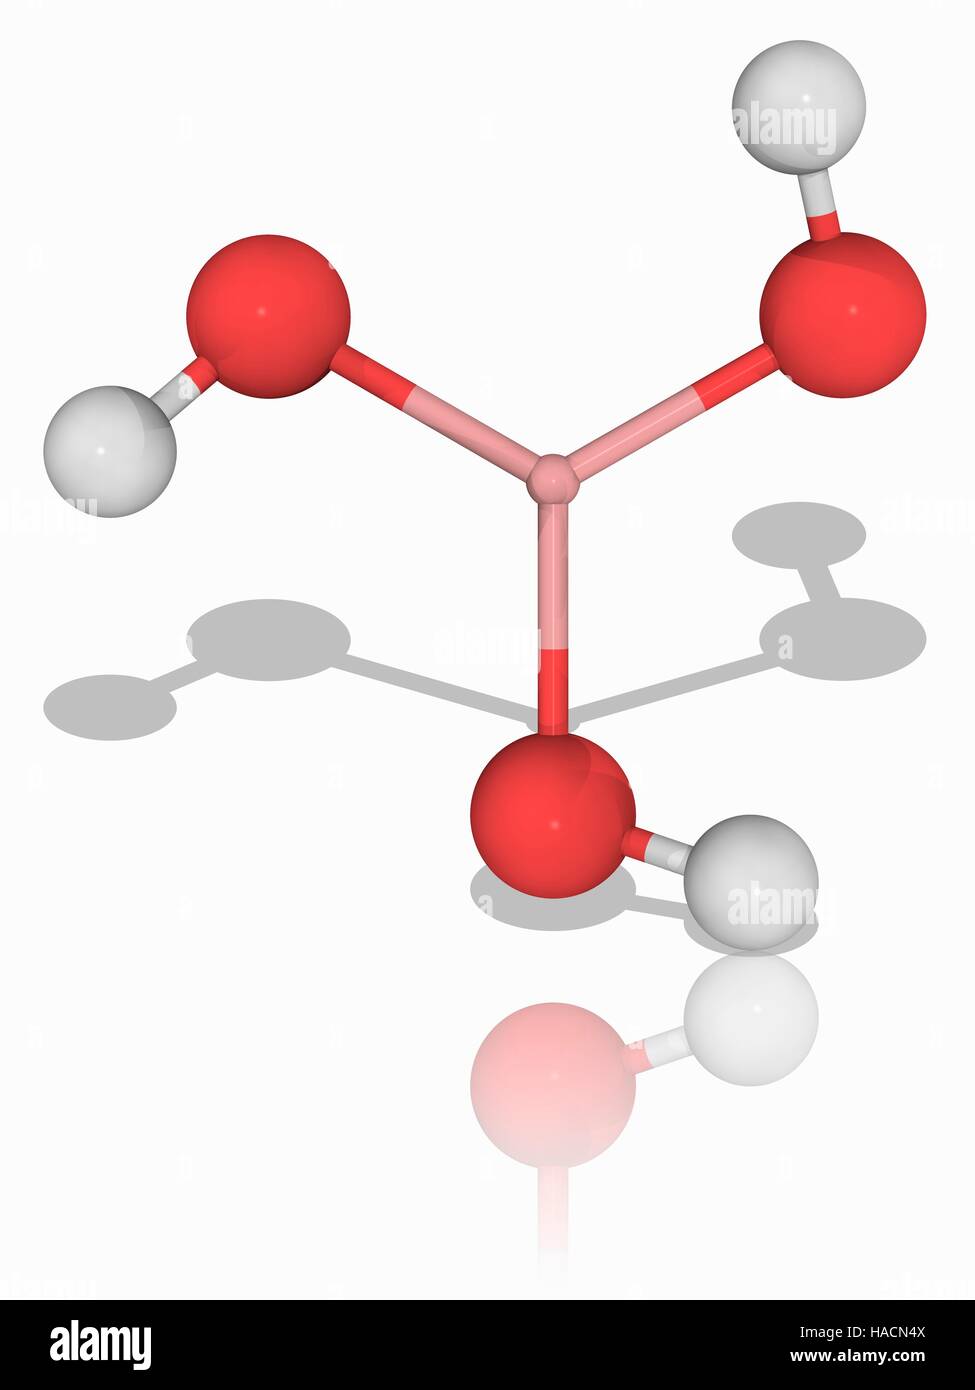 Boric acid. Molecular model of the inorganic chemical boric acid (H3.B.O3). This chemical compound is used as an antiseptic, insecticide, flame retardant and neutron absorber. Atoms are represented as spheres and are colour-coded: boron (pink), hydrogen (white) and oxygen (red). Illustration. Stock Photo